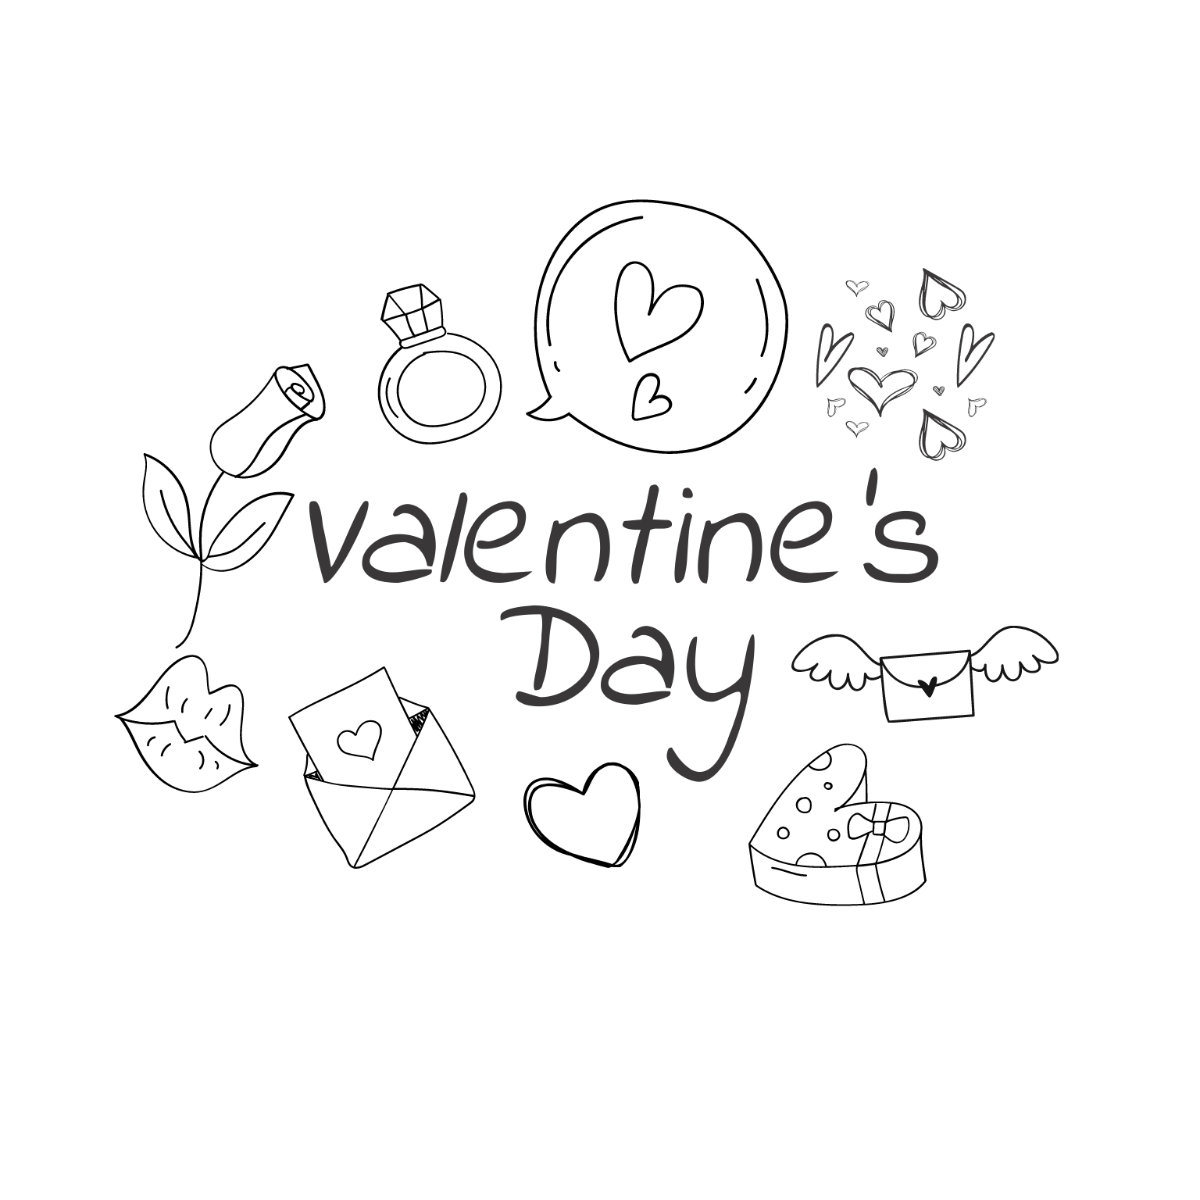 Free valentines day drawing s examples